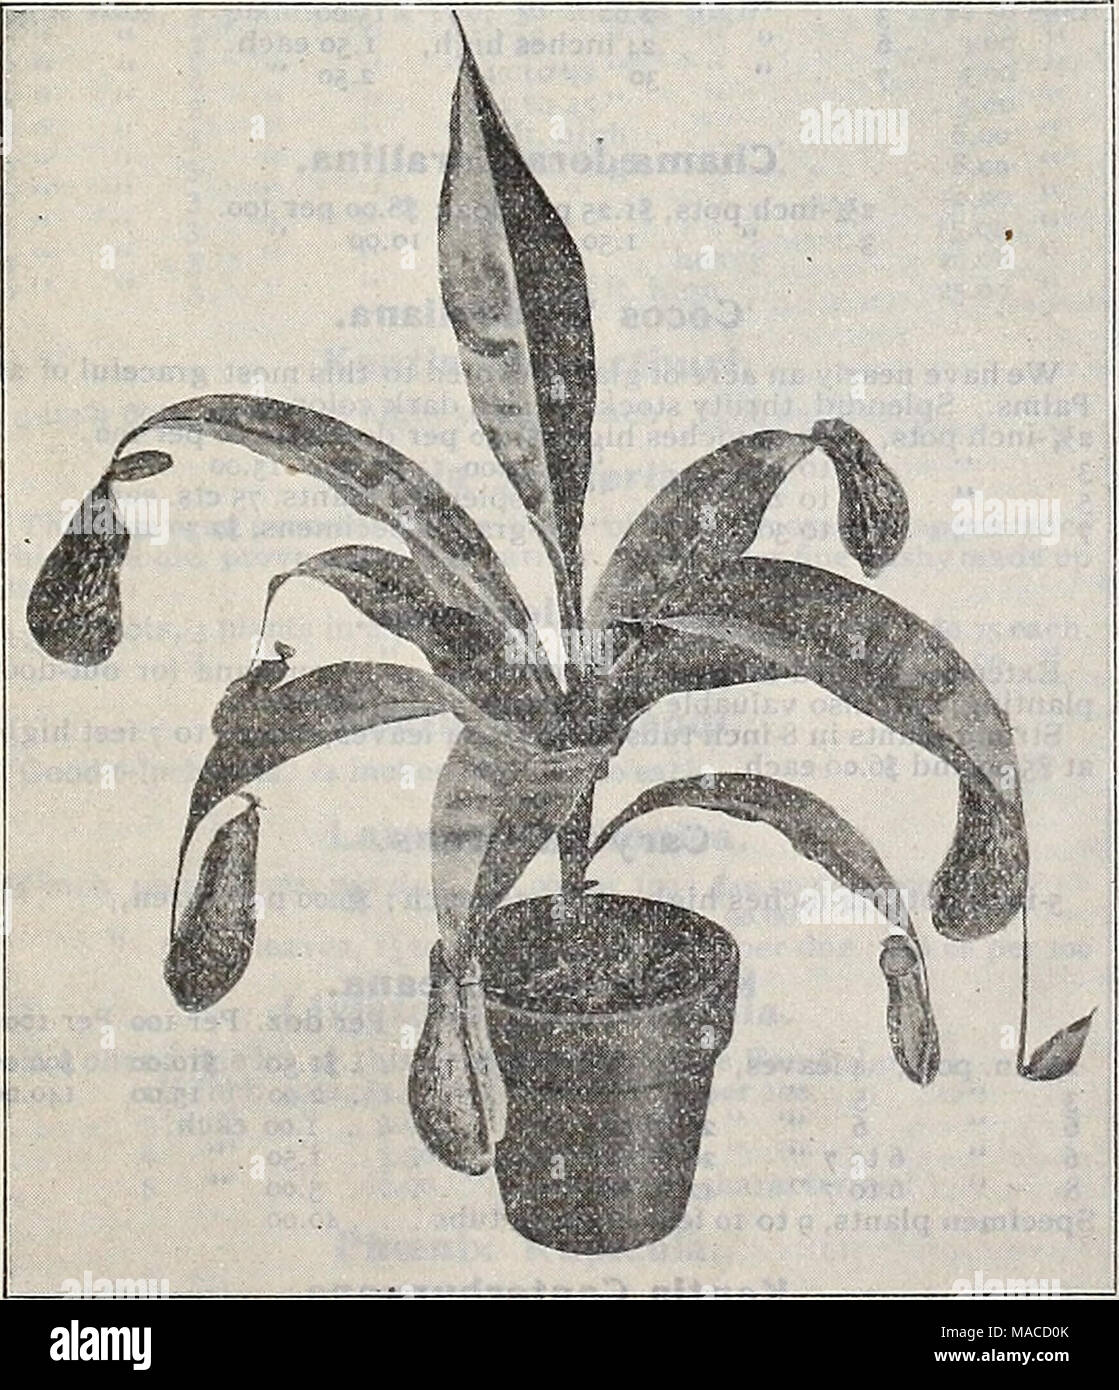 . Dreer's wholesale price list : seeds for florists plants for florists bulbs for florists vegetable seeds, fungicides, fertilizers, insecticides, implements, sundries, etc . MARANTA MAKOYANA Metrosideros (Bottle Brush). Floribunda. Strong plants in 6-inch pots. 60 cts. each. Musa Ensete (Abyssinian Banana). 5-inch pots, 35 cents each ; $4.00 per dozen Marantas. Our collection of these choice stove plants is the largest and most complete in the country. Each Massangeana (true) .... 25 Mosella 75 Makoyana 35 Medio Picta 35 Musaica 35 Oppenheimiana 3.S Porteana 35 Pulchelia 35 Rosea-iineata . 50 Stock Photo